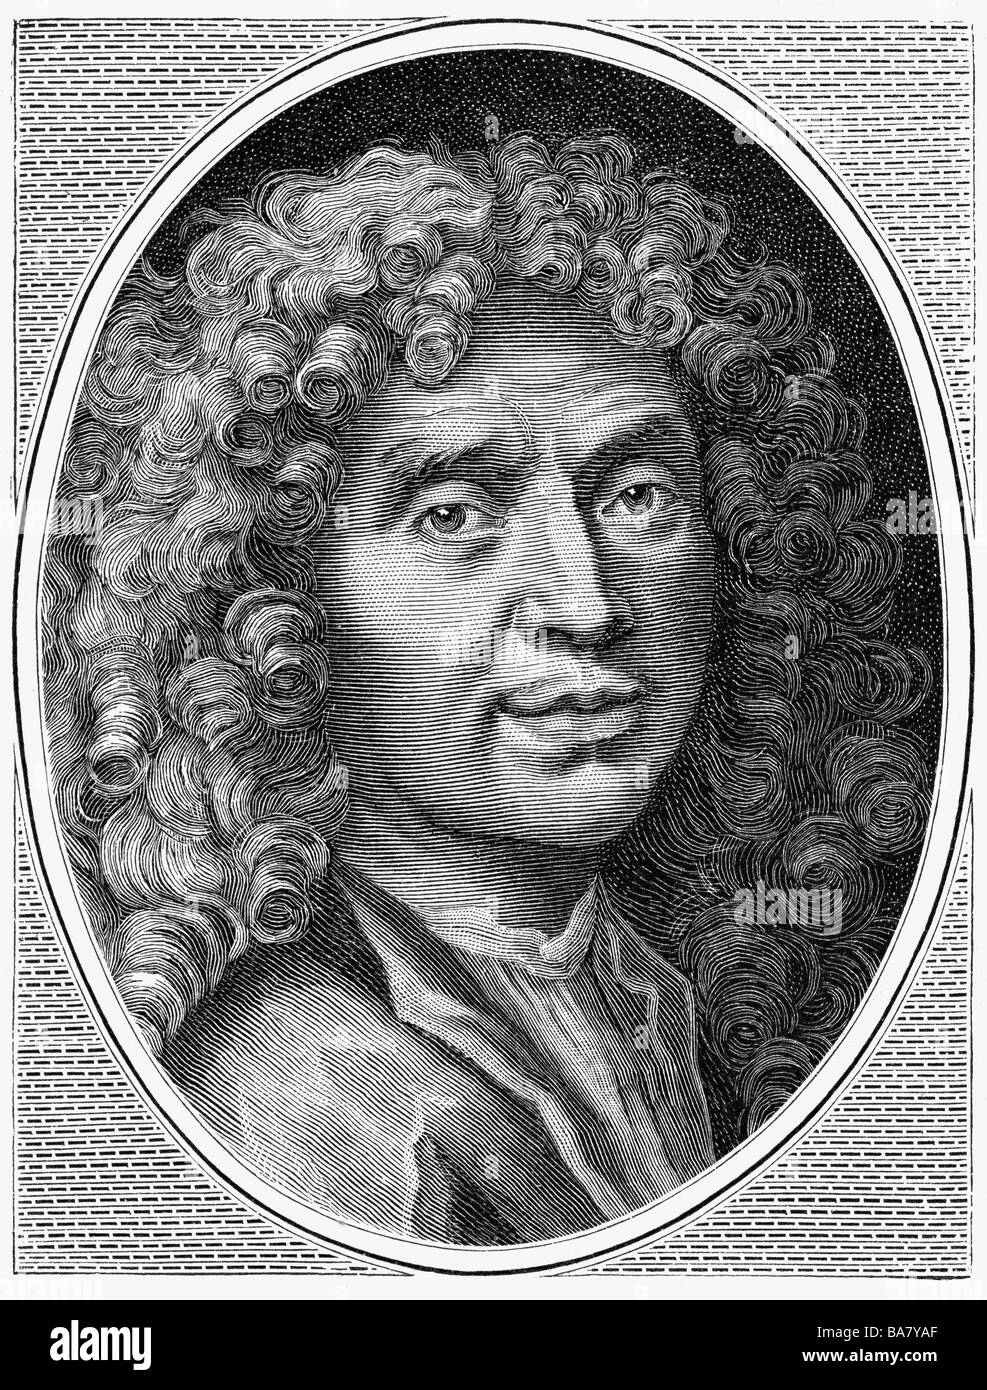 Moliere, 15.1.1622 - 17.2.1673, French author / writer, portrait, wood engraving, 19th century, , Stock Photo